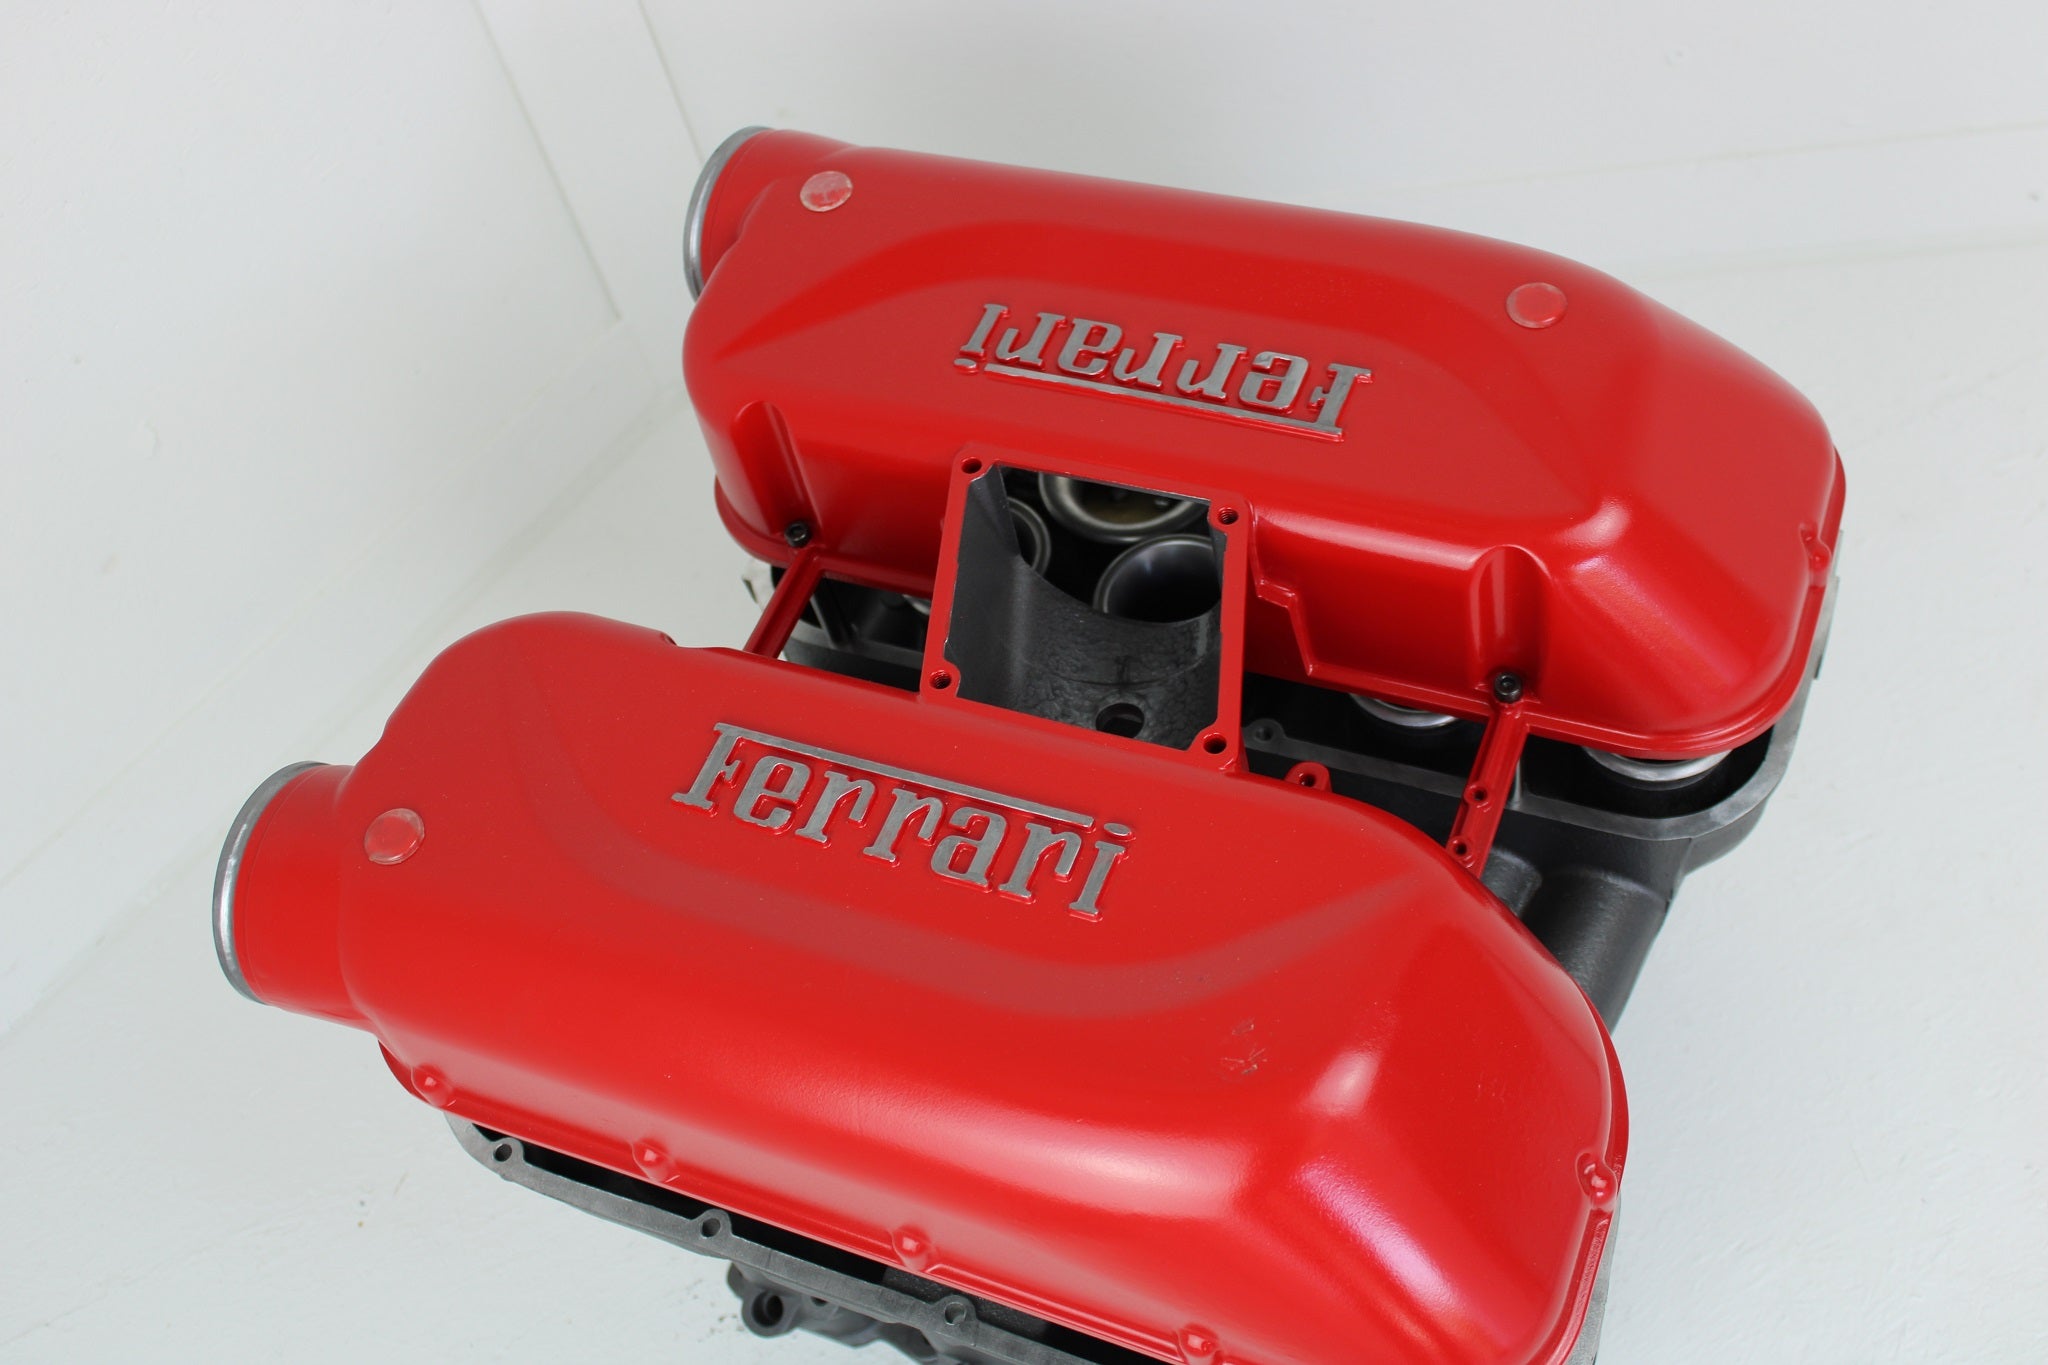 Birds-eye view of a Ferrari intake manifold table without its glass top, finished in red with the Ferrari logo displayed on both sides.